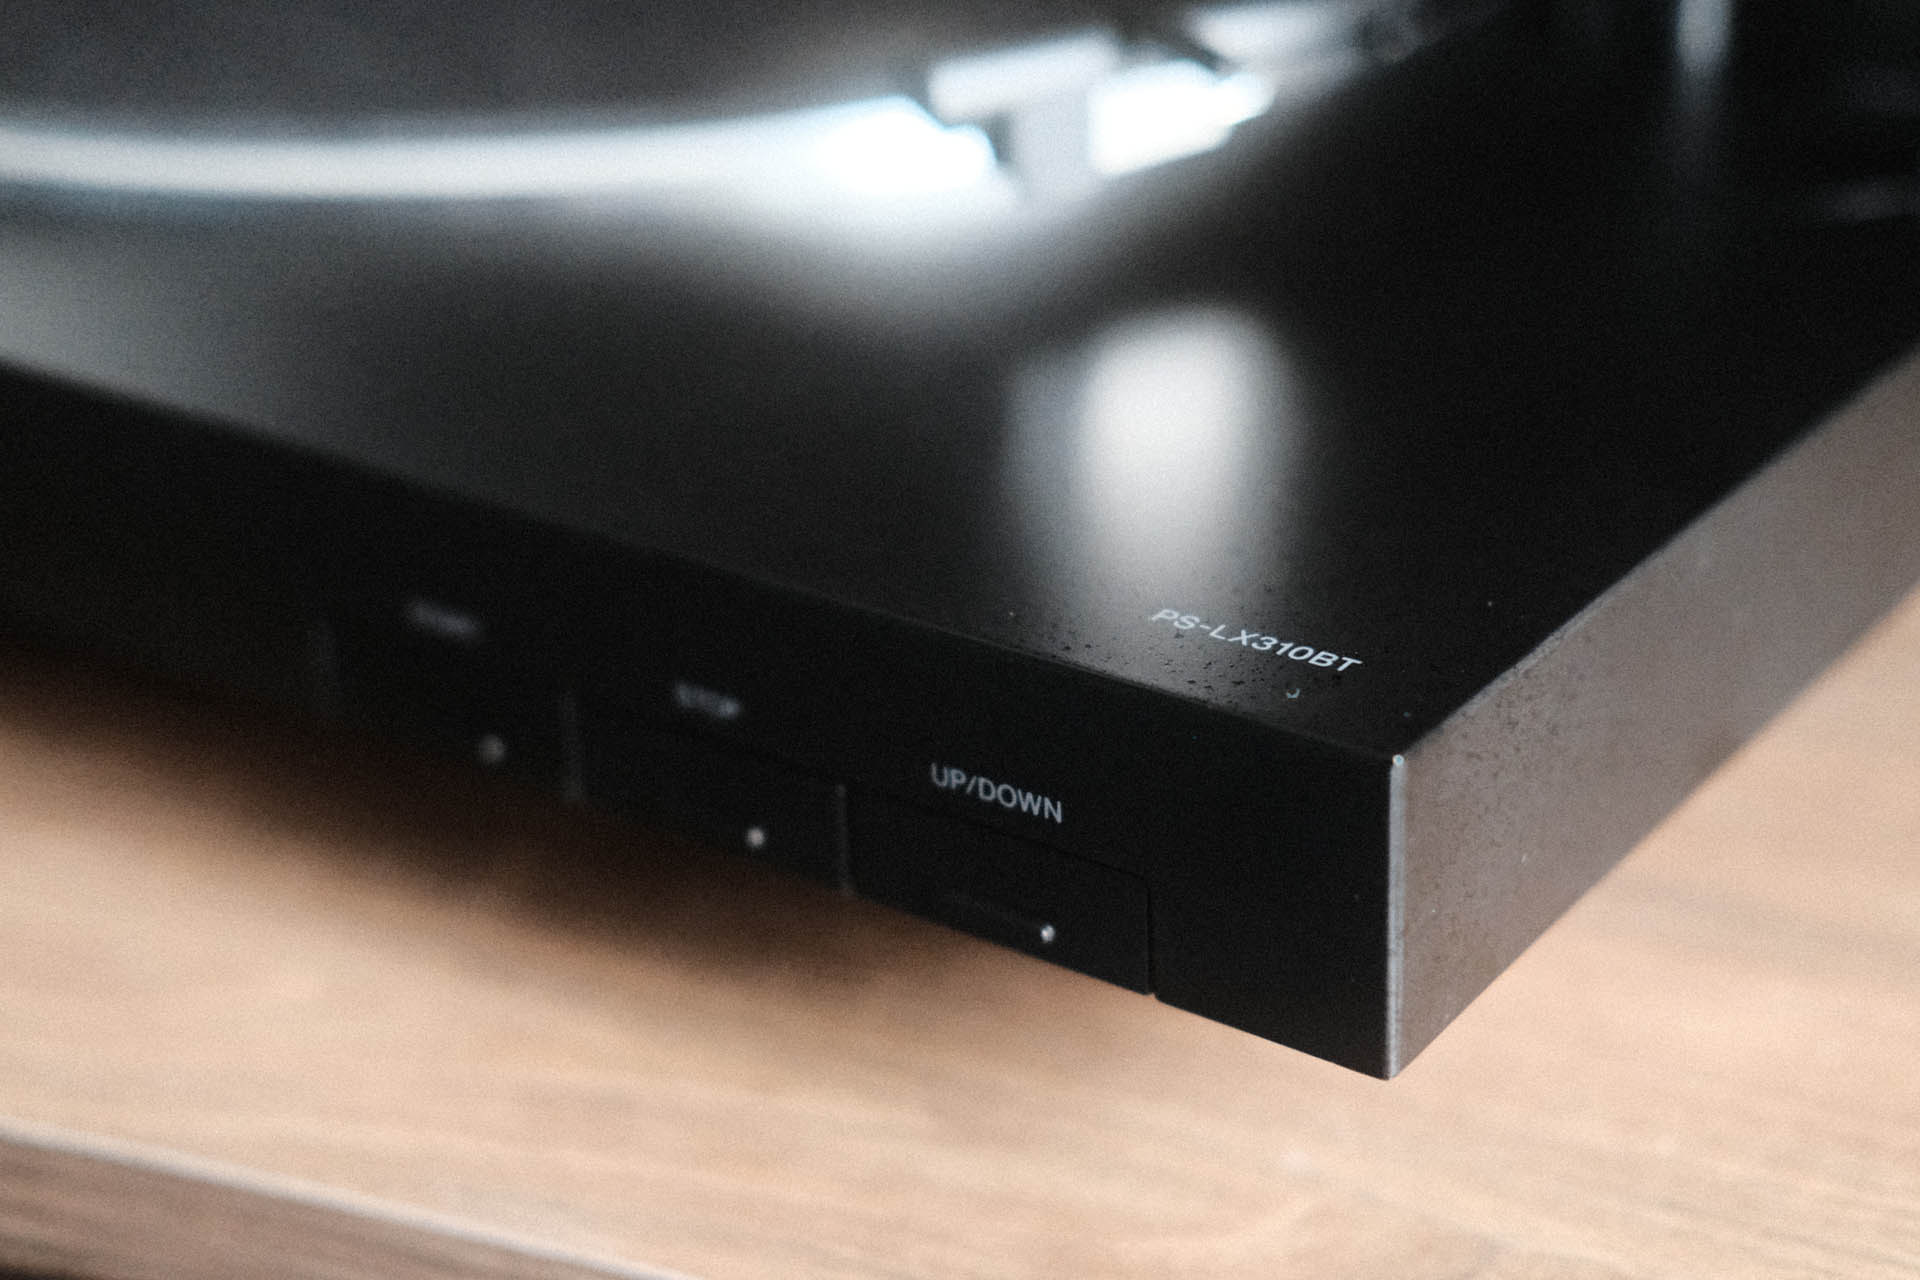 Turntable with BLUETOOTH® connectivity, PS-LX310BT